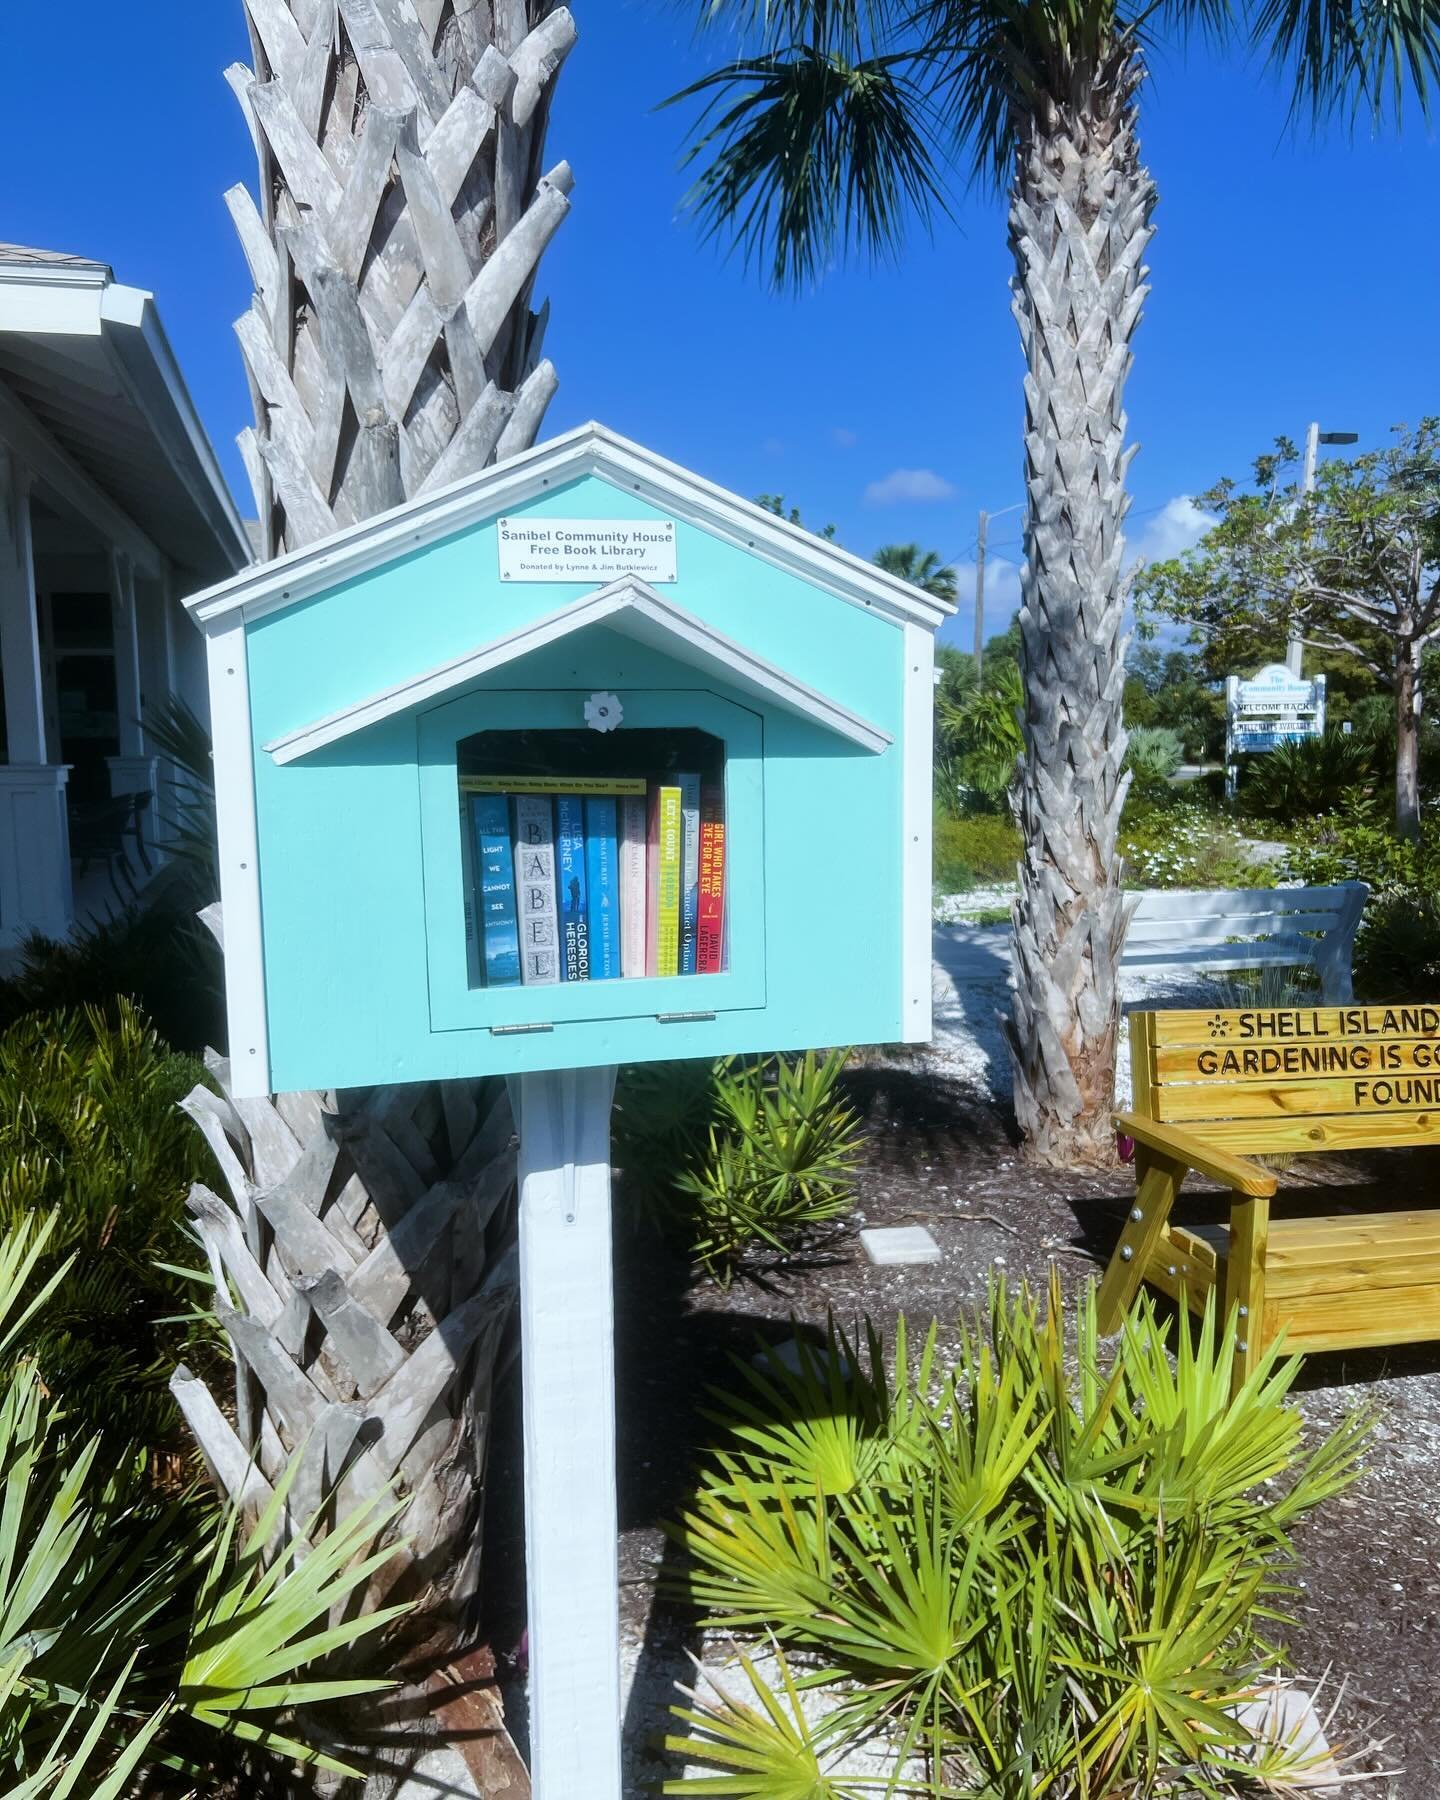 Post season cleaning means some great donations to our local #littlefreelibraries #sanibel #sanibelisland #books #community #read